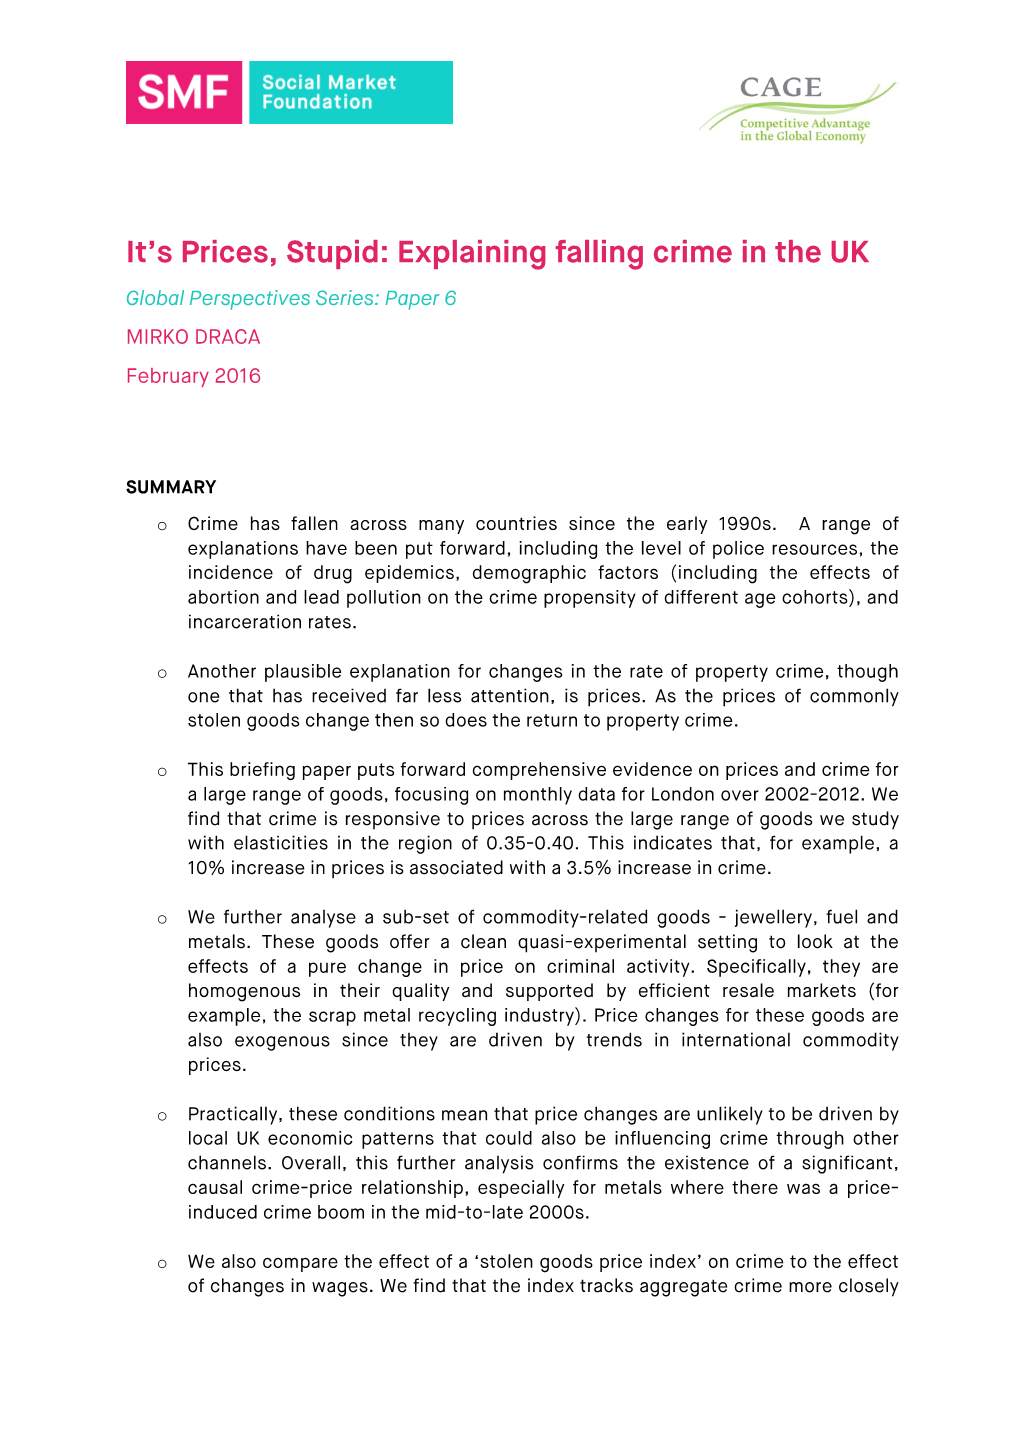 It's Prices, Stupid: Explaining Falling Crime in the UK